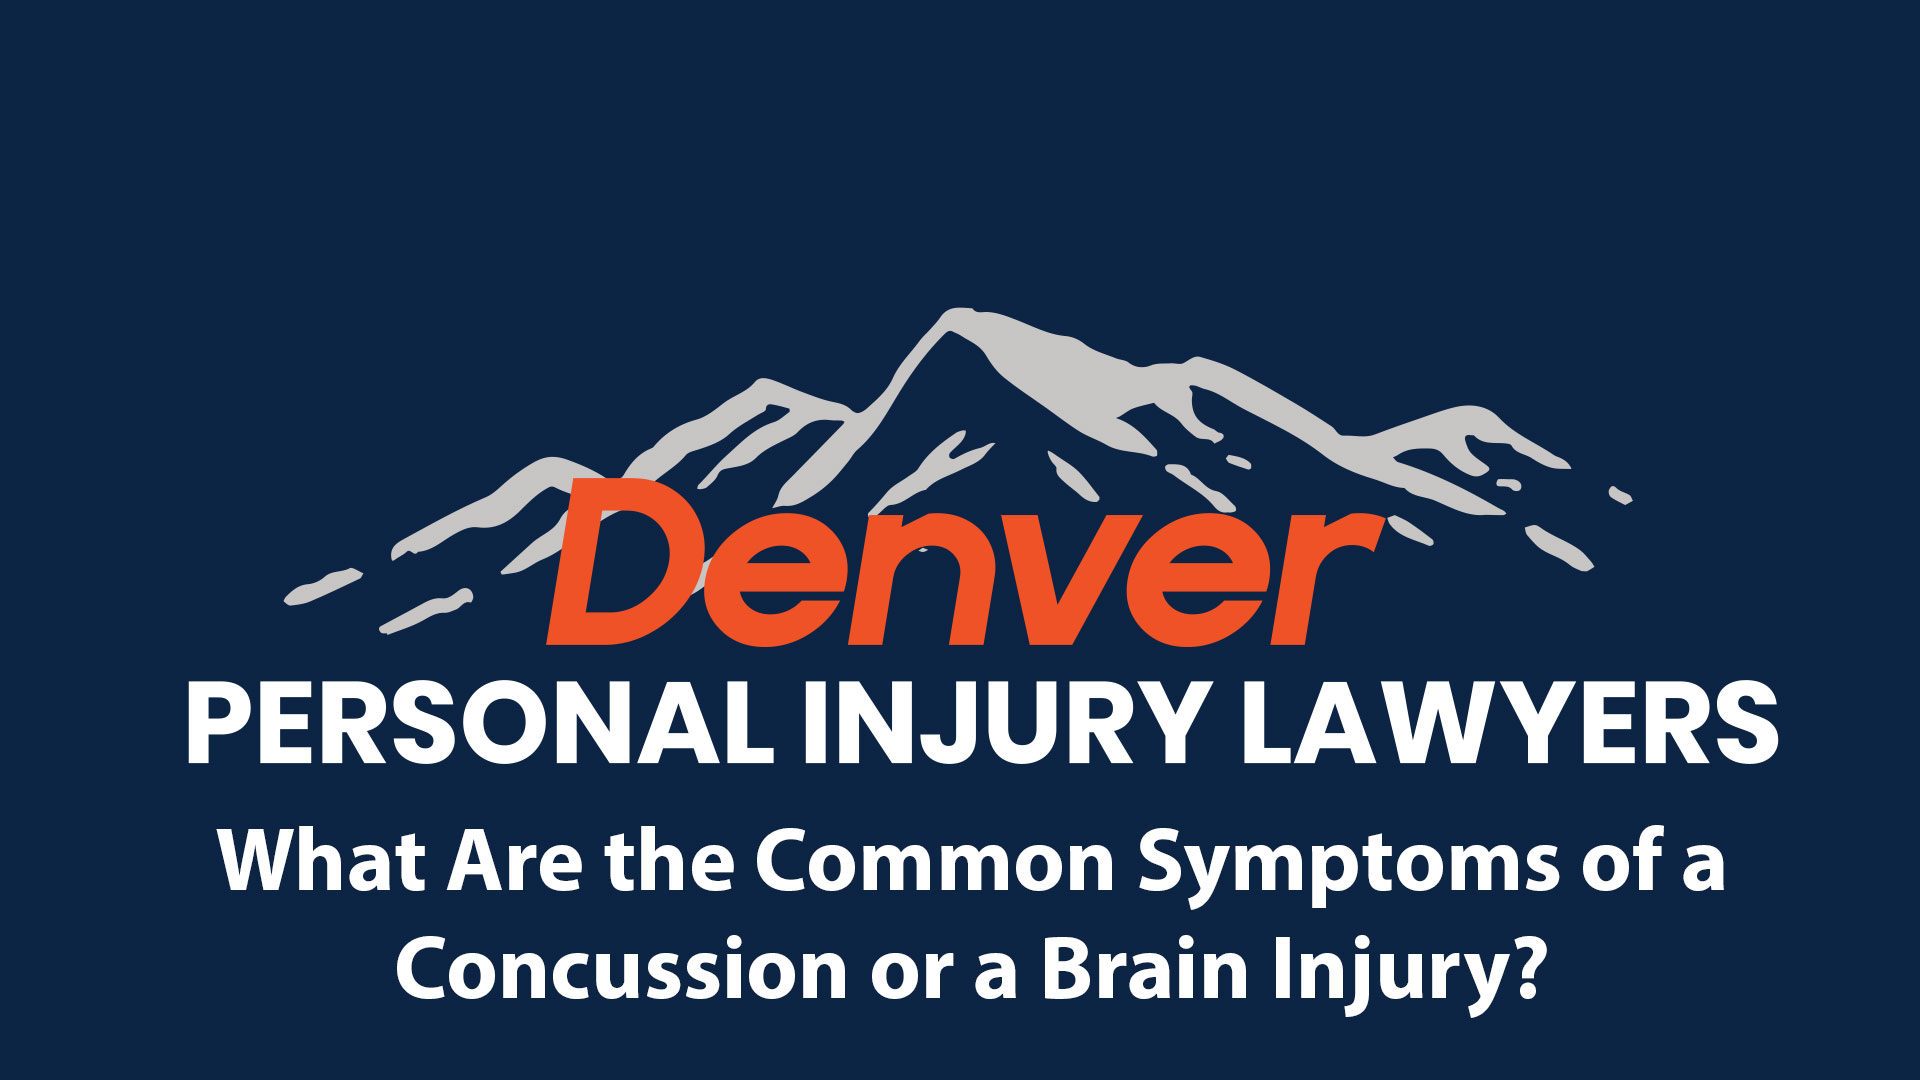 What Are the Common Symptoms of a Concussion or a Brain Injury?